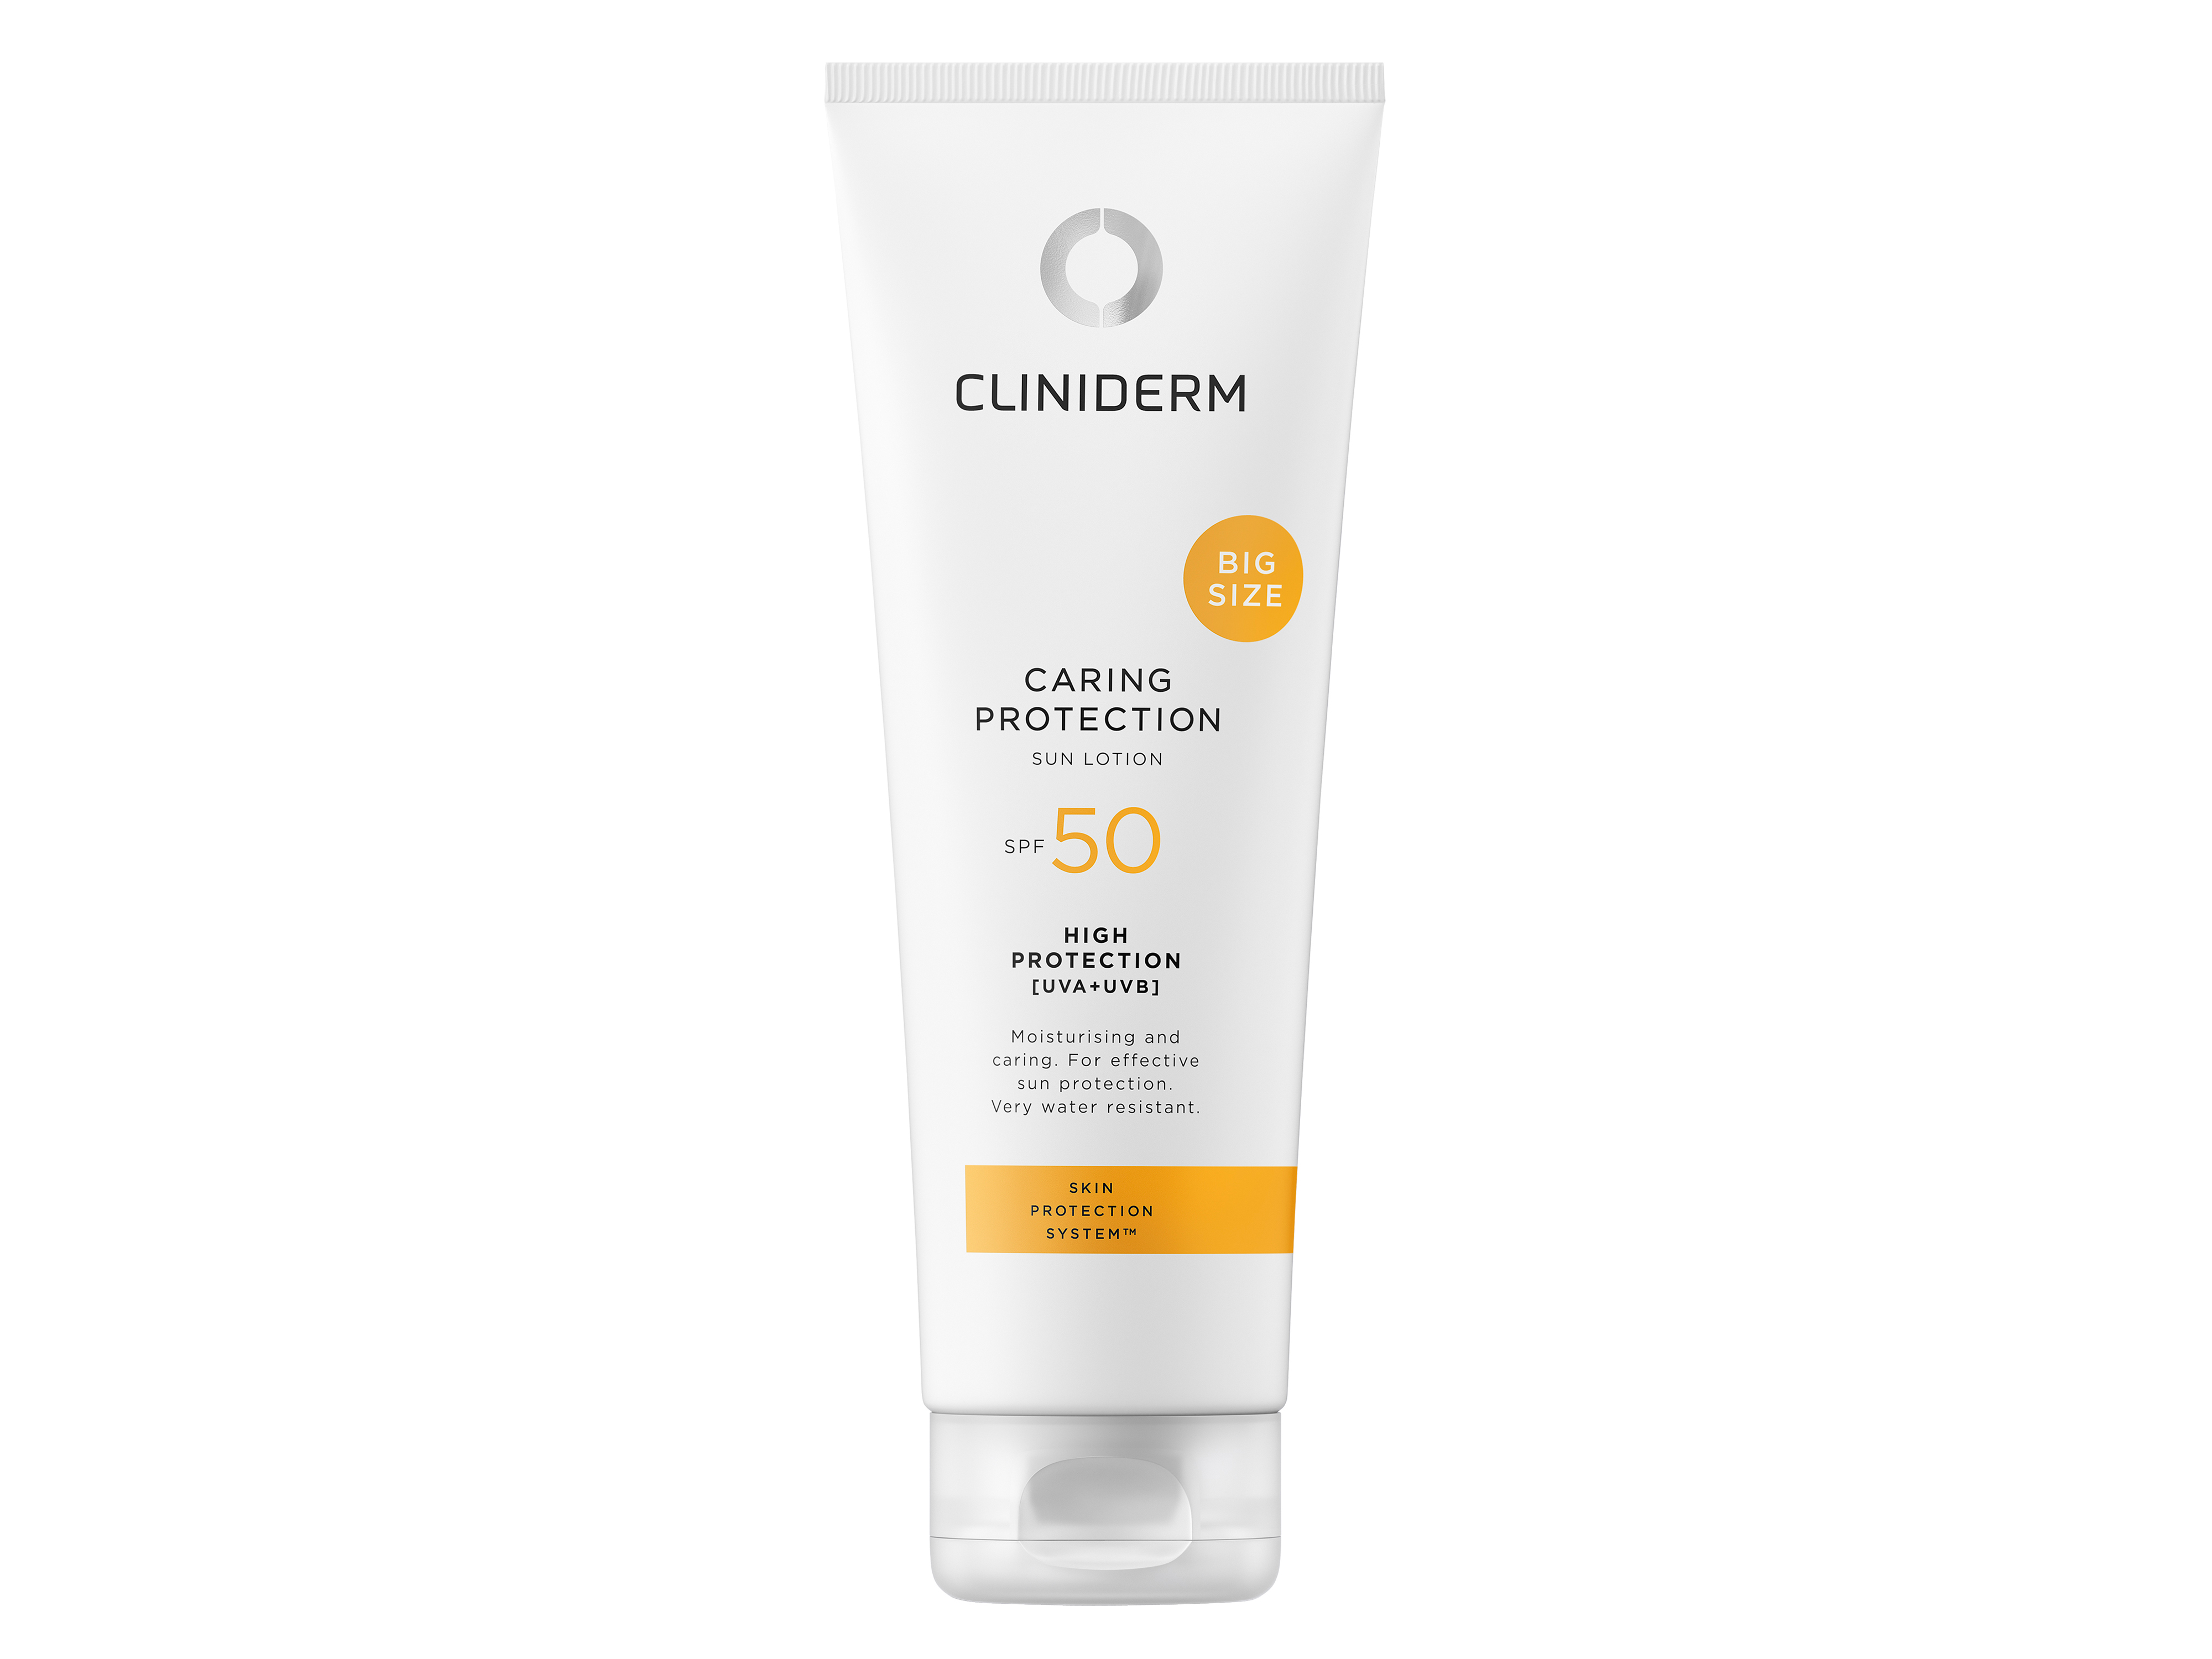 Cliniderm Caring Protection Sun Lotion, SPF 50, 250 ml